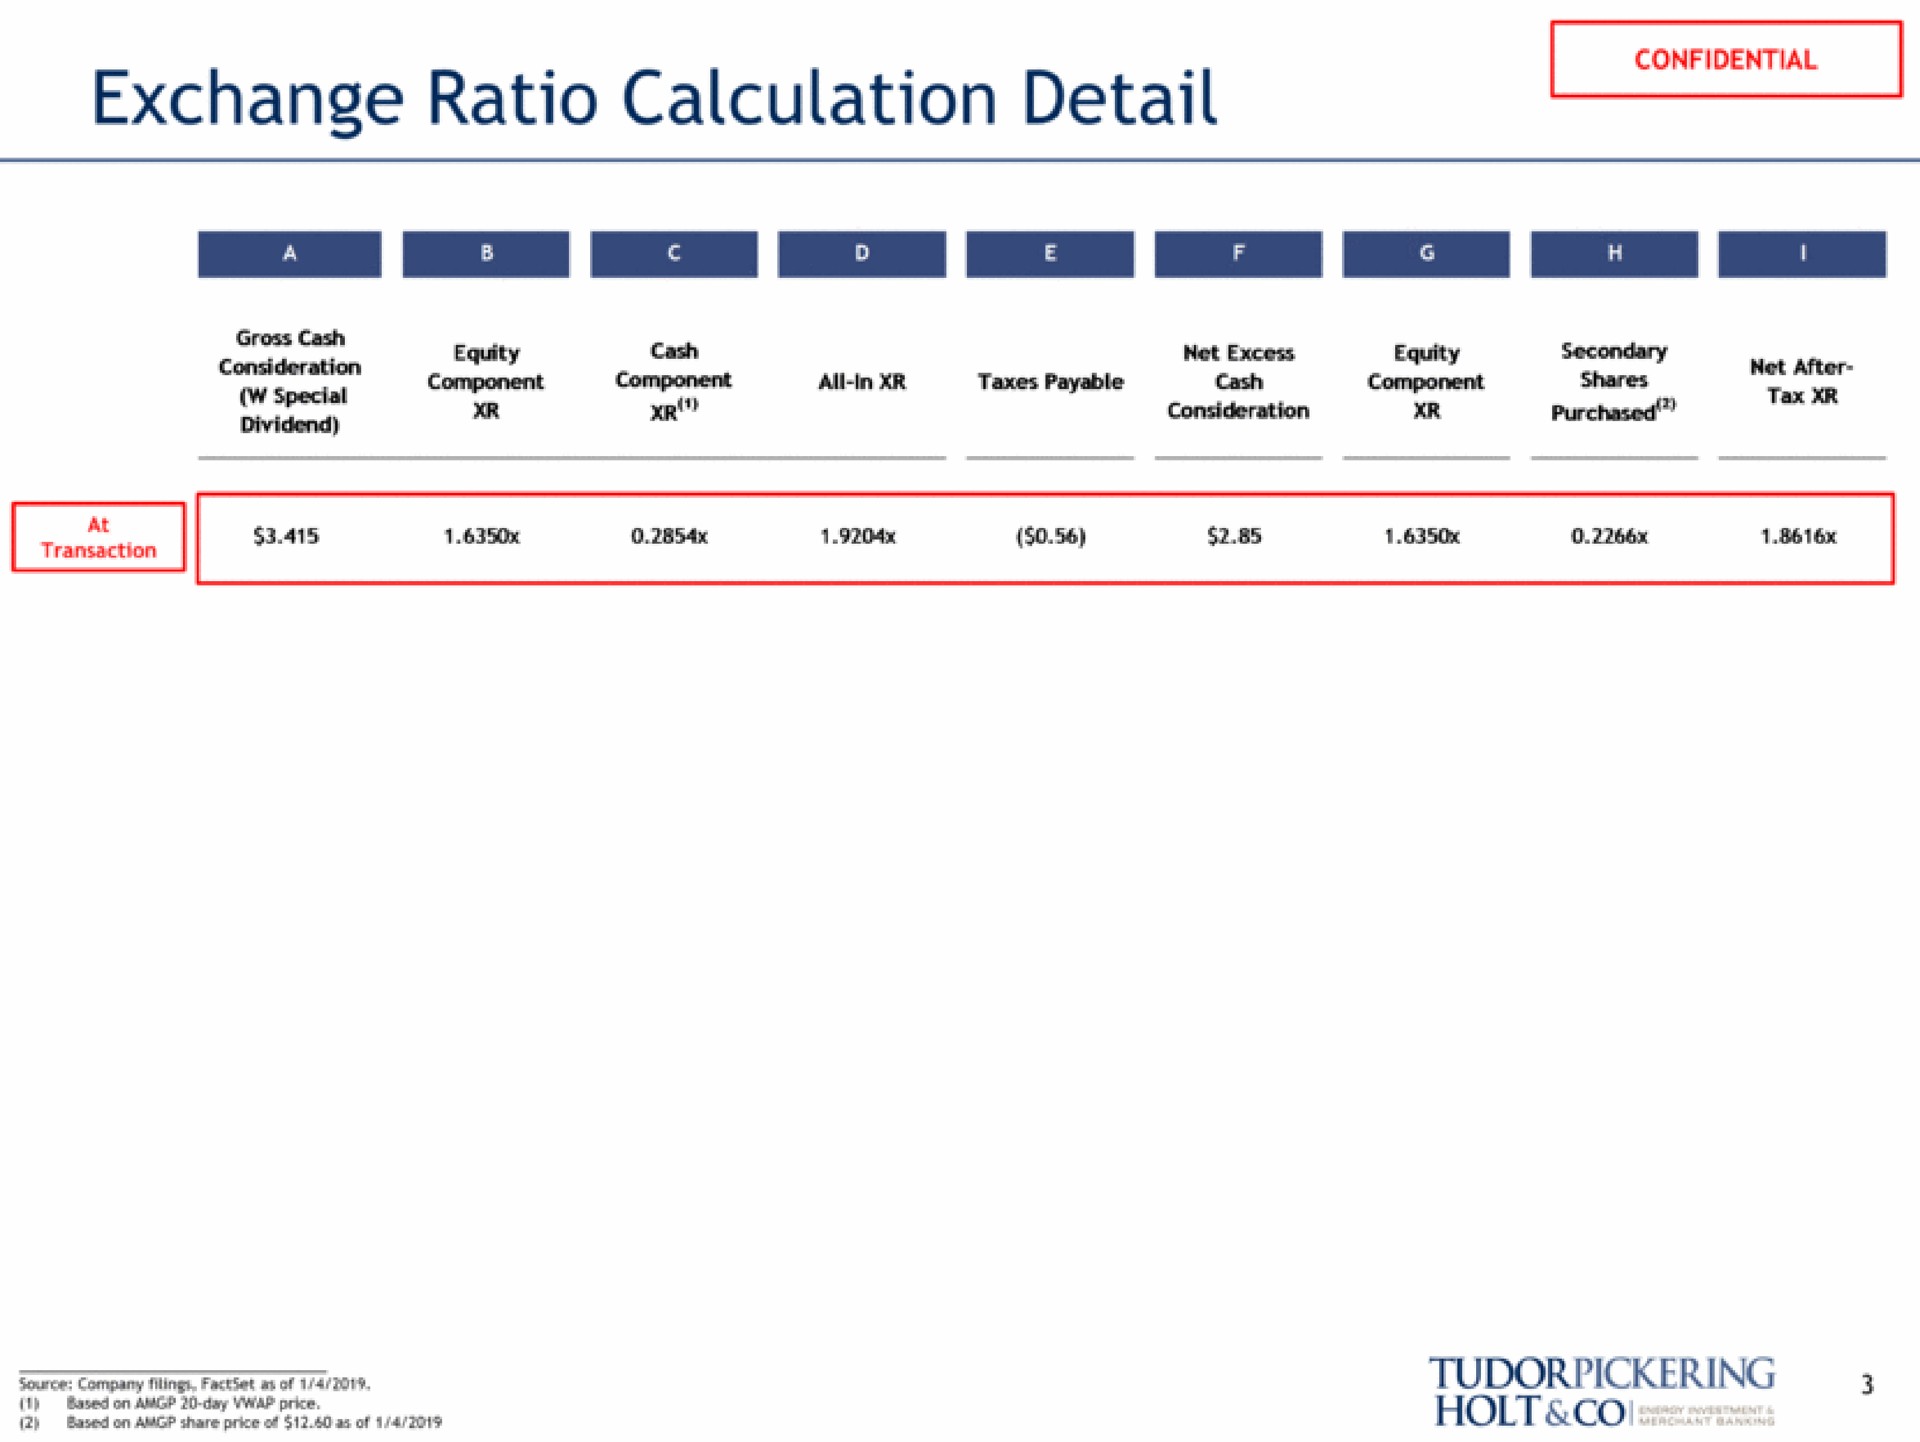 exchange ratio calculation detail on share price of as holt of | Tudor, Pickering, Holt & Co